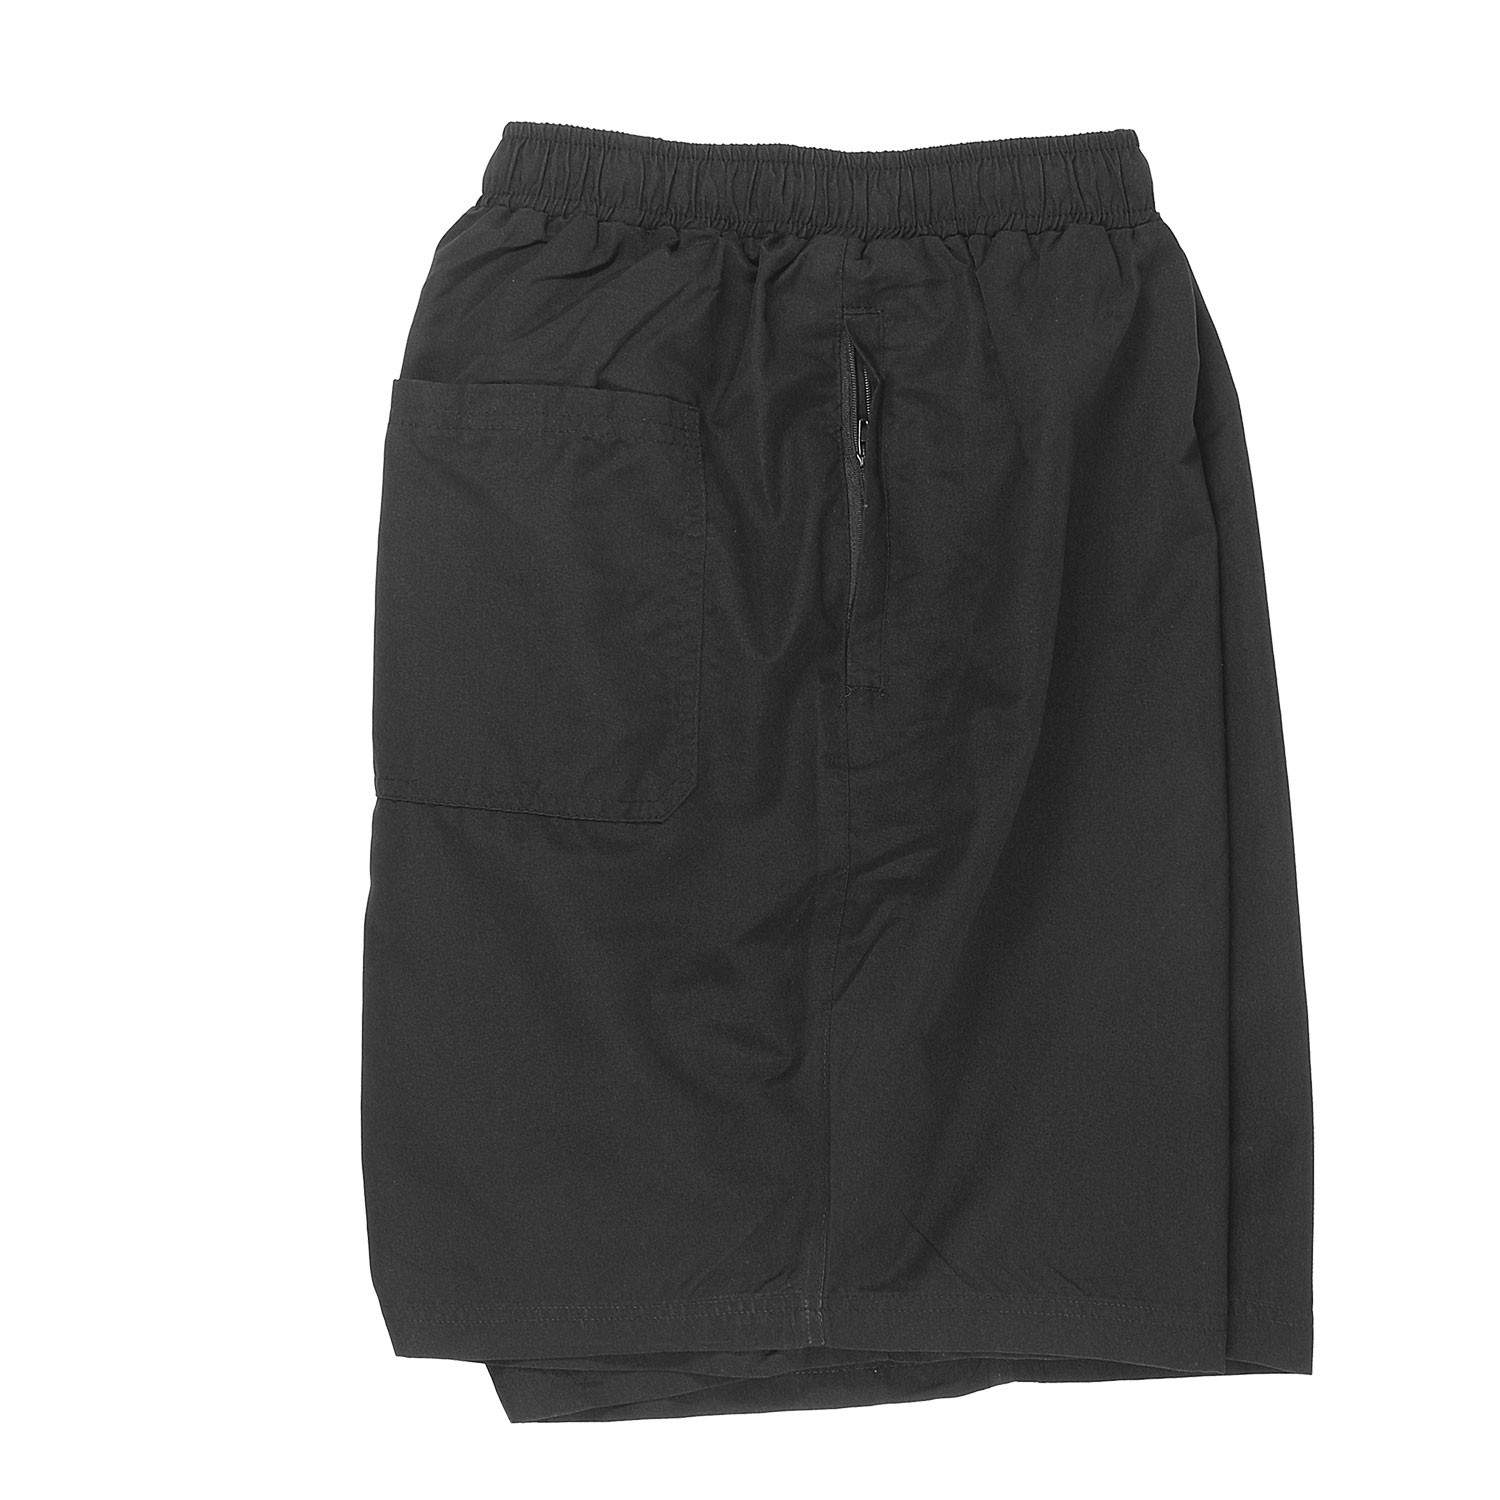 Black Swimming trunks by Abraxas in big sizes up to 10XL